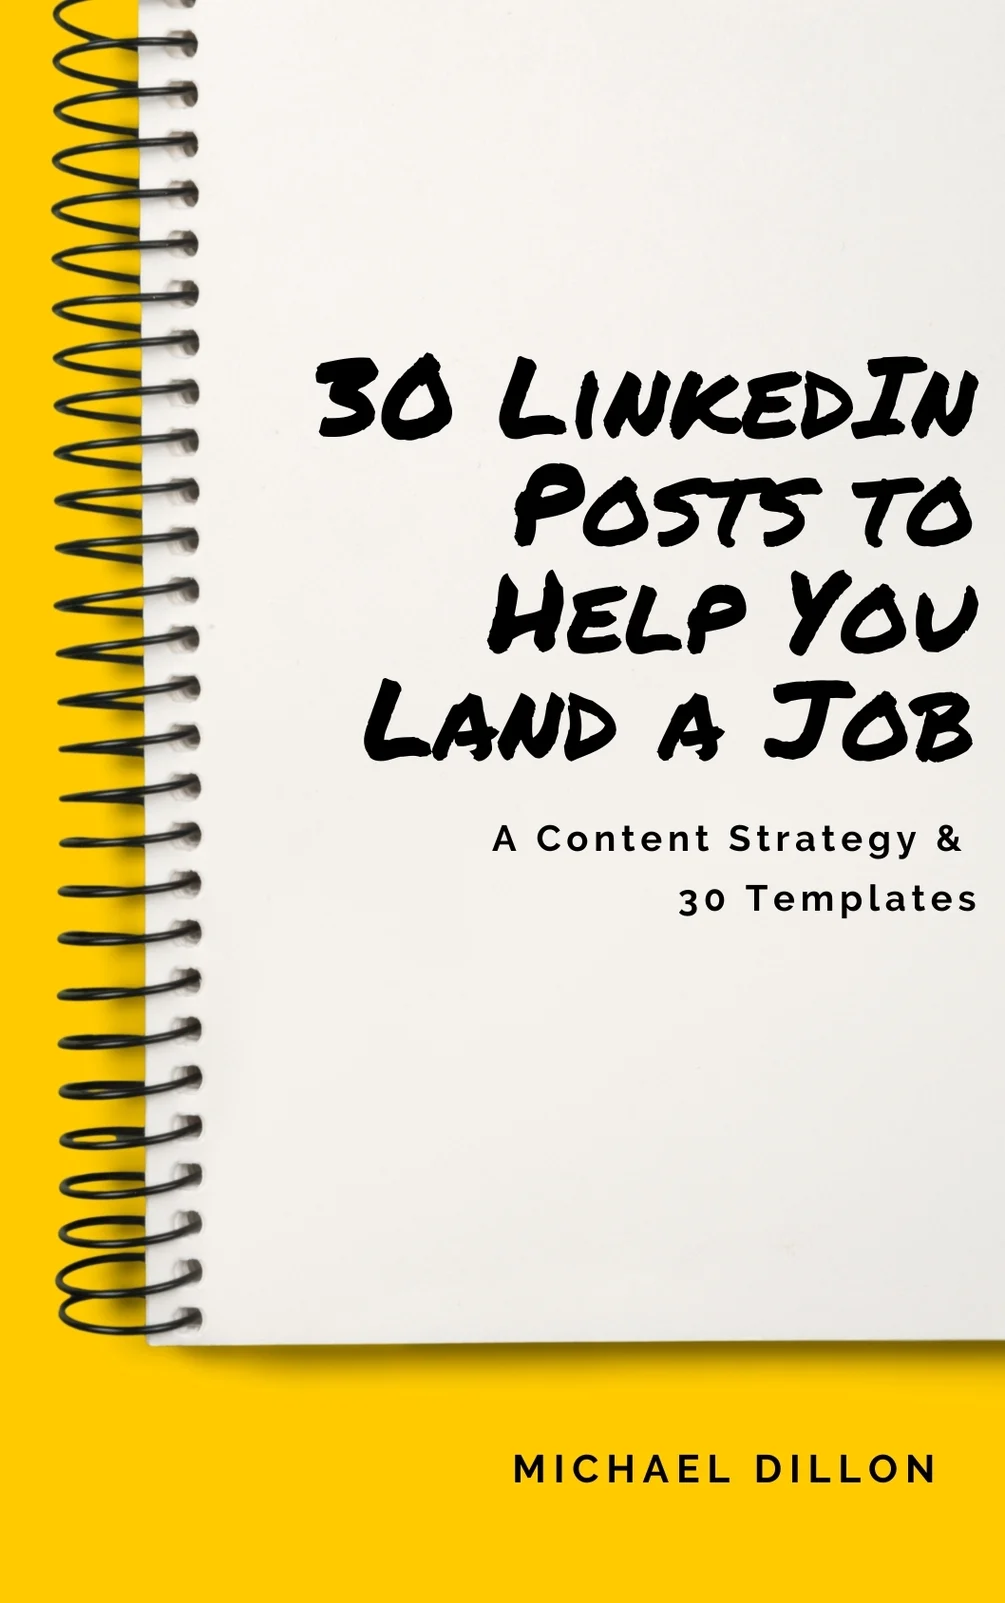 Michael Dillion – LinkedIn Posts for Job-seekers (A Proven Content Strategy and 30 Days of Templates) Download